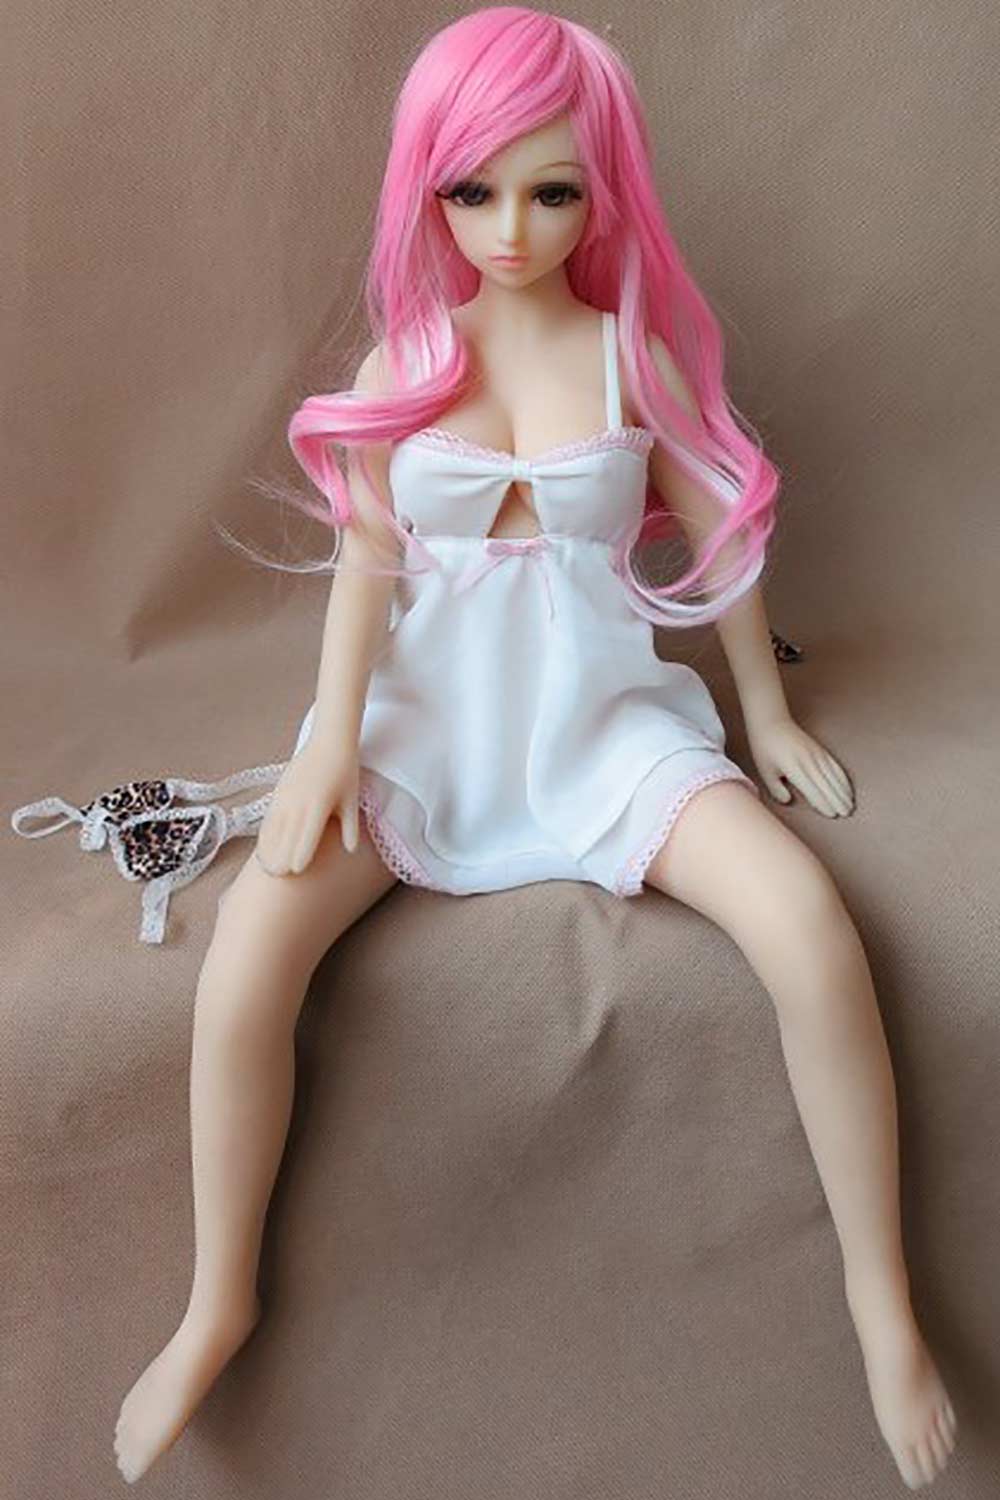 Mini sex doll with pink long hair and hands on legs